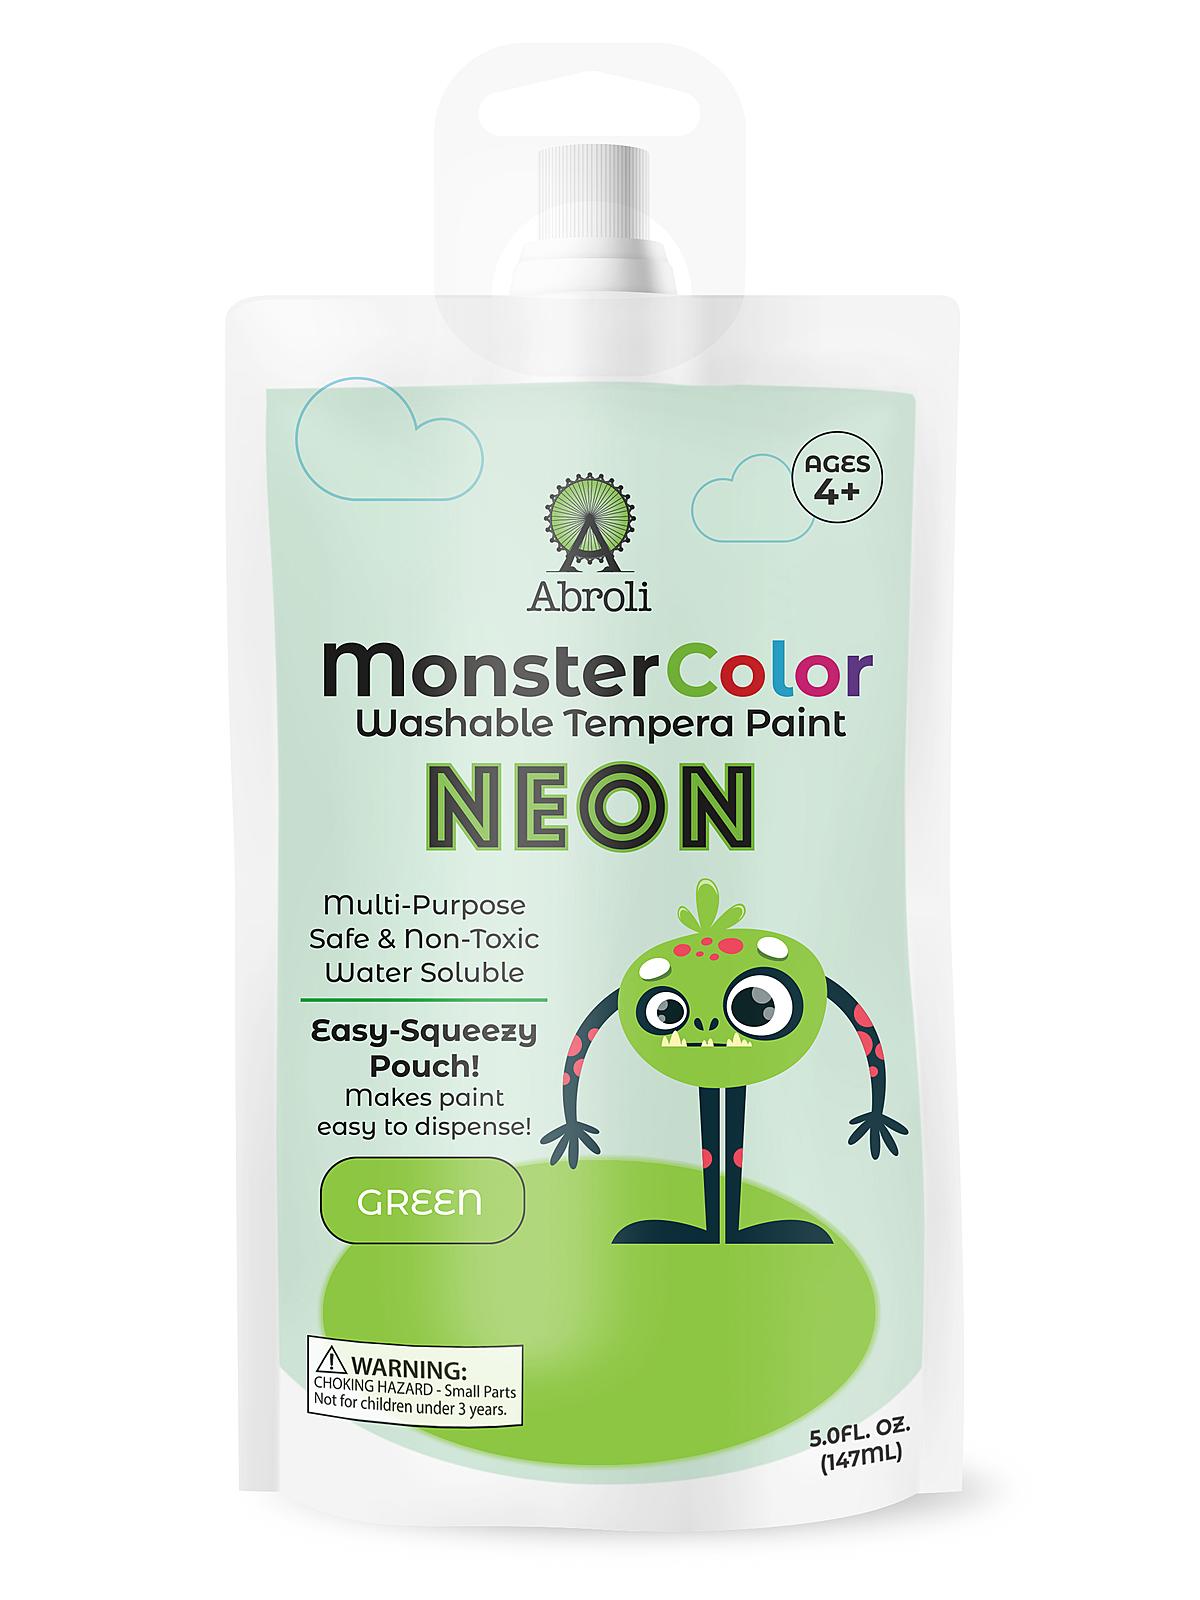 Monster Color Tempera Paint Neon Green 5 Oz. Pouch